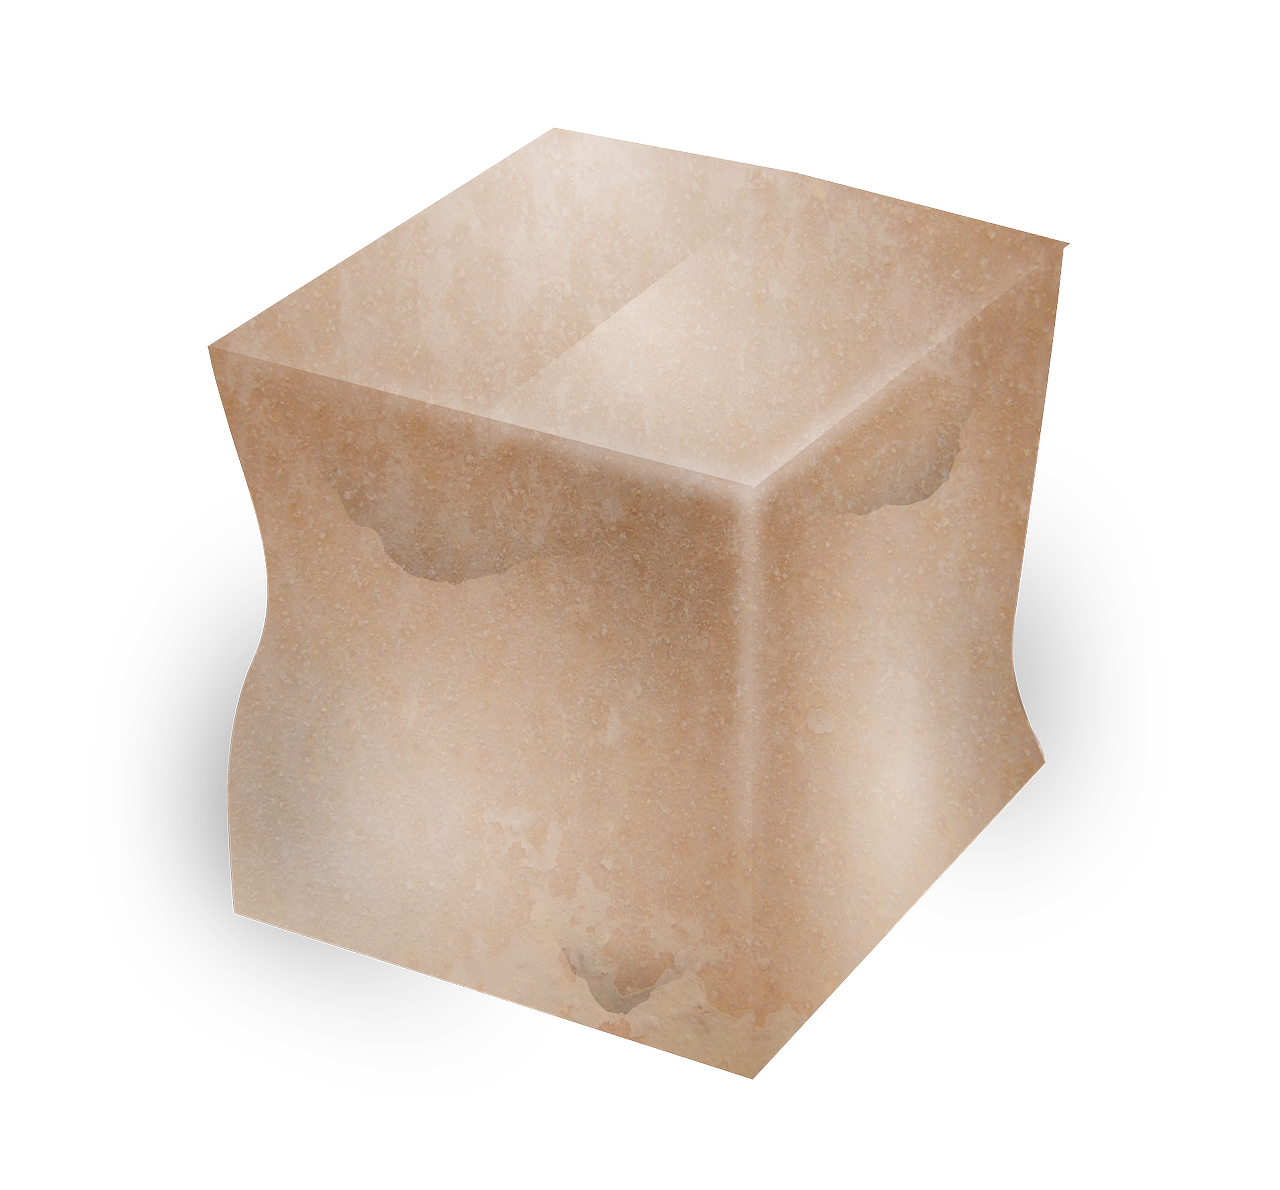 a close up of a box on a white background, a raytraced image, by Gatōken Shunshi, mingei, himalayan rocksalt lamp, miscellaneous objects, [ [ soft ] ], old parchment